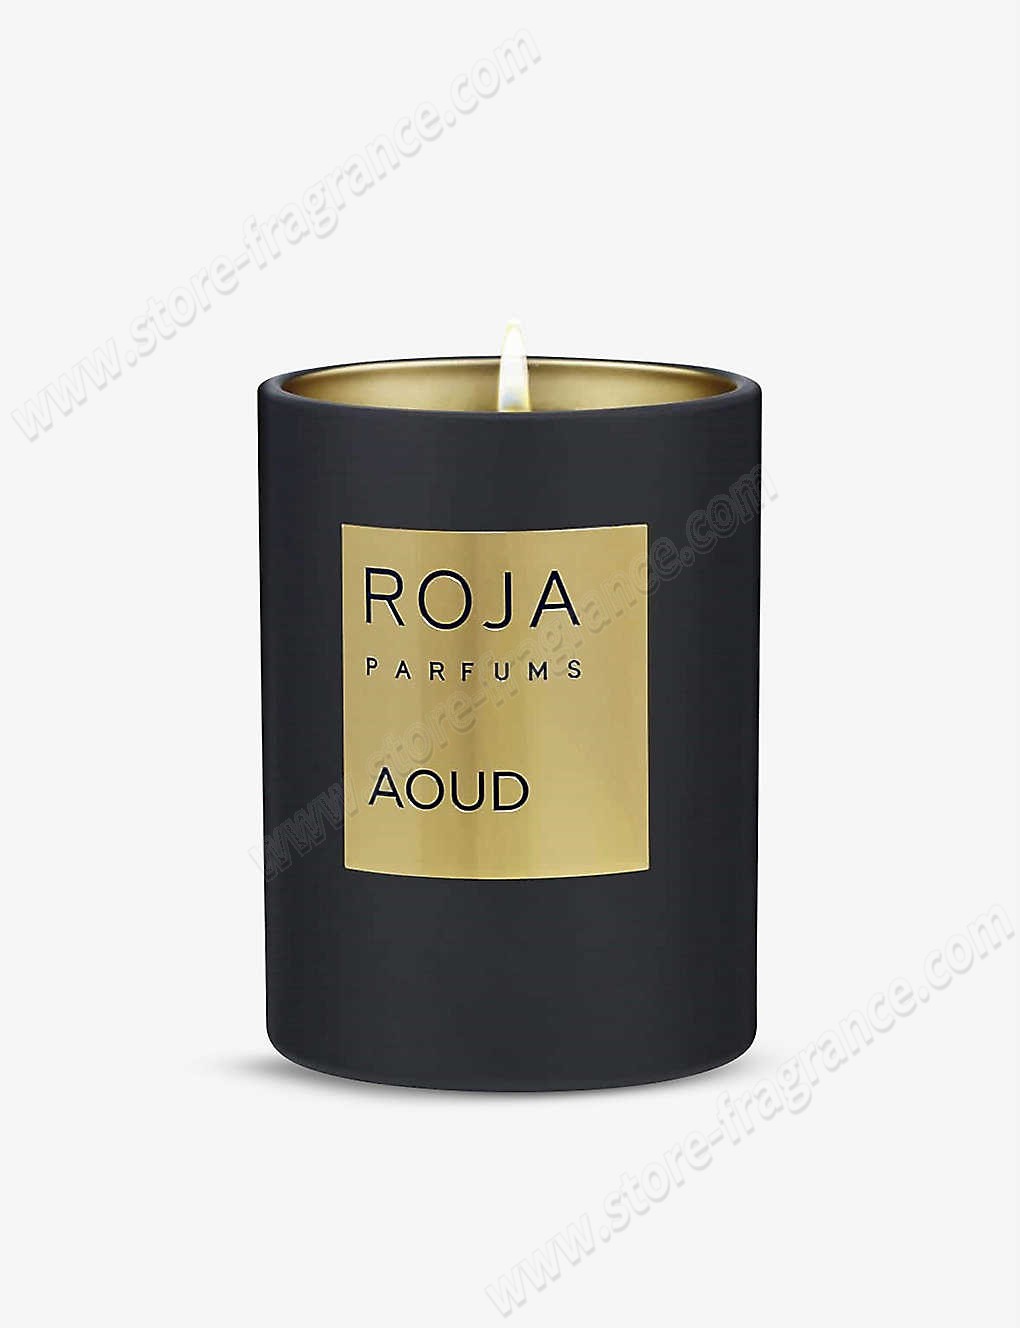 ROJA PARFUMS/Aoud scented candle 300g ✿ Discount Store - ROJA PARFUMS/Aoud scented candle 300g ✿ Discount Store